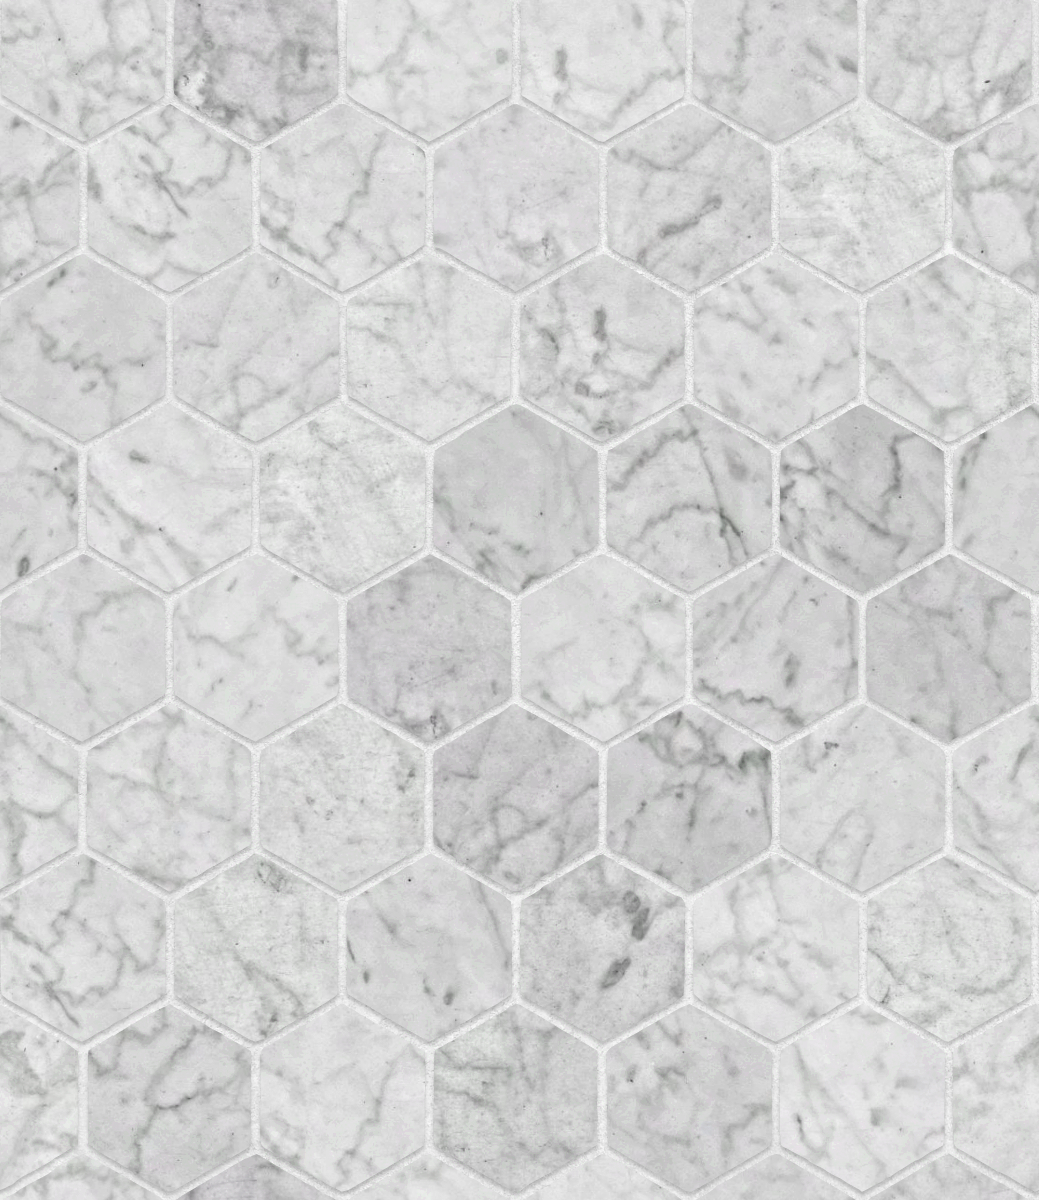 A seamless stone texture with white marble blocks arranged in a Hexagonal pattern